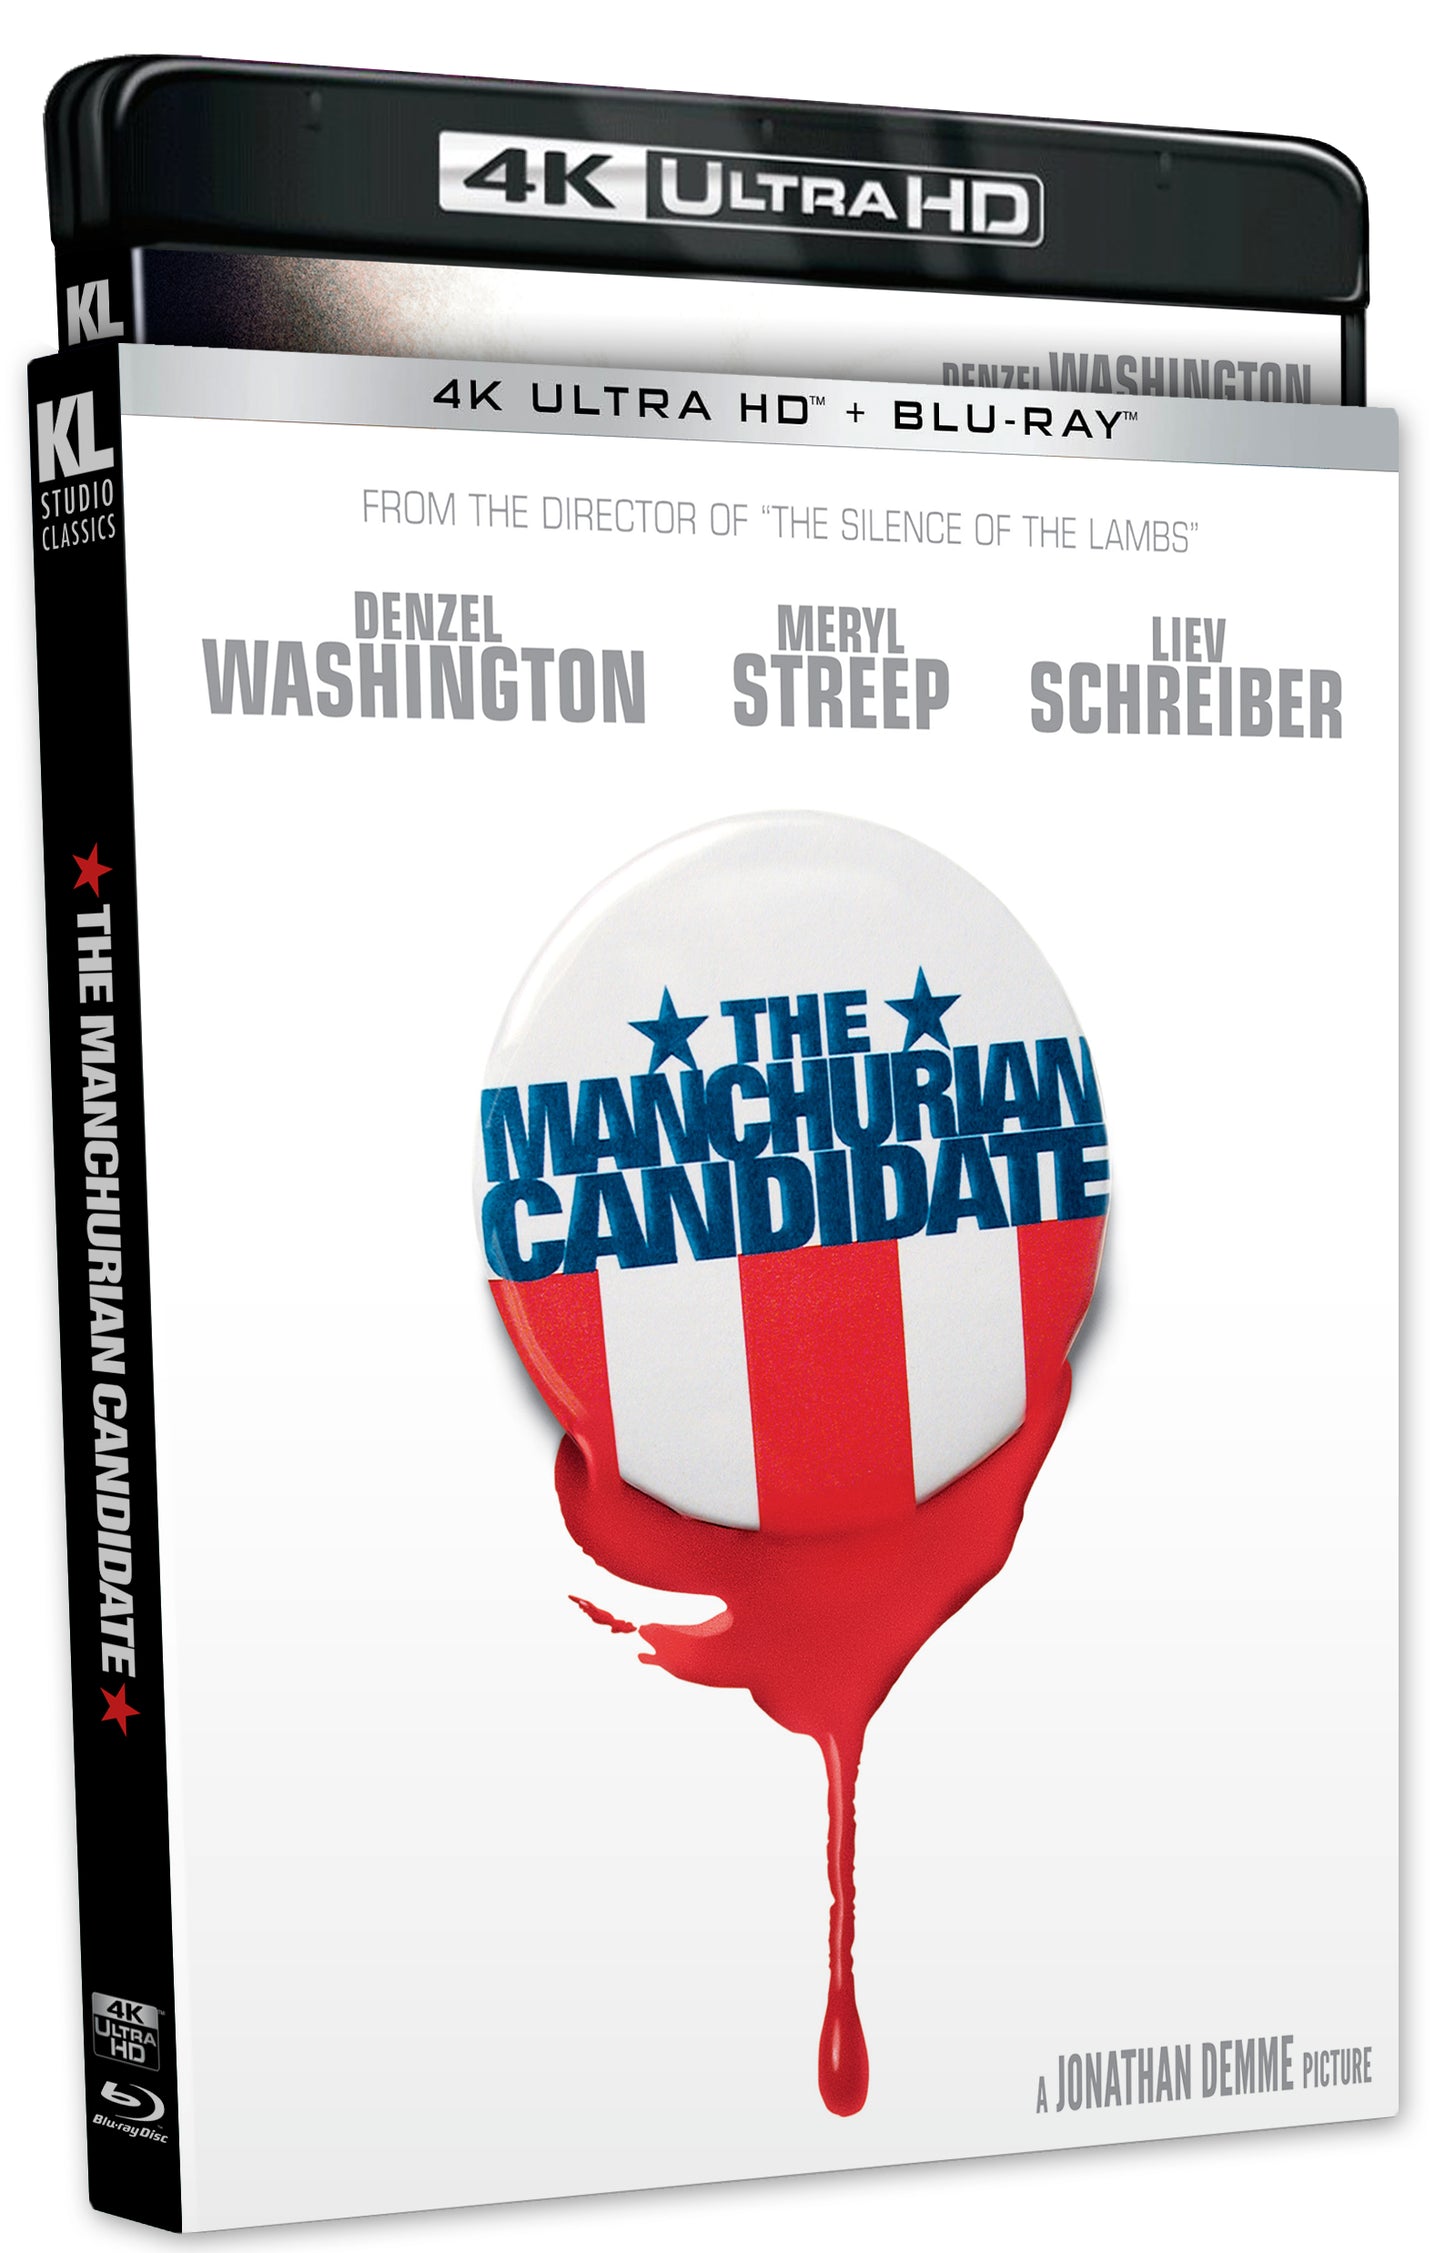 The Manchurian Candidate (2004) 4K UHD + Blu-ray with Slipcover (Kino Lorber) [Preorder]